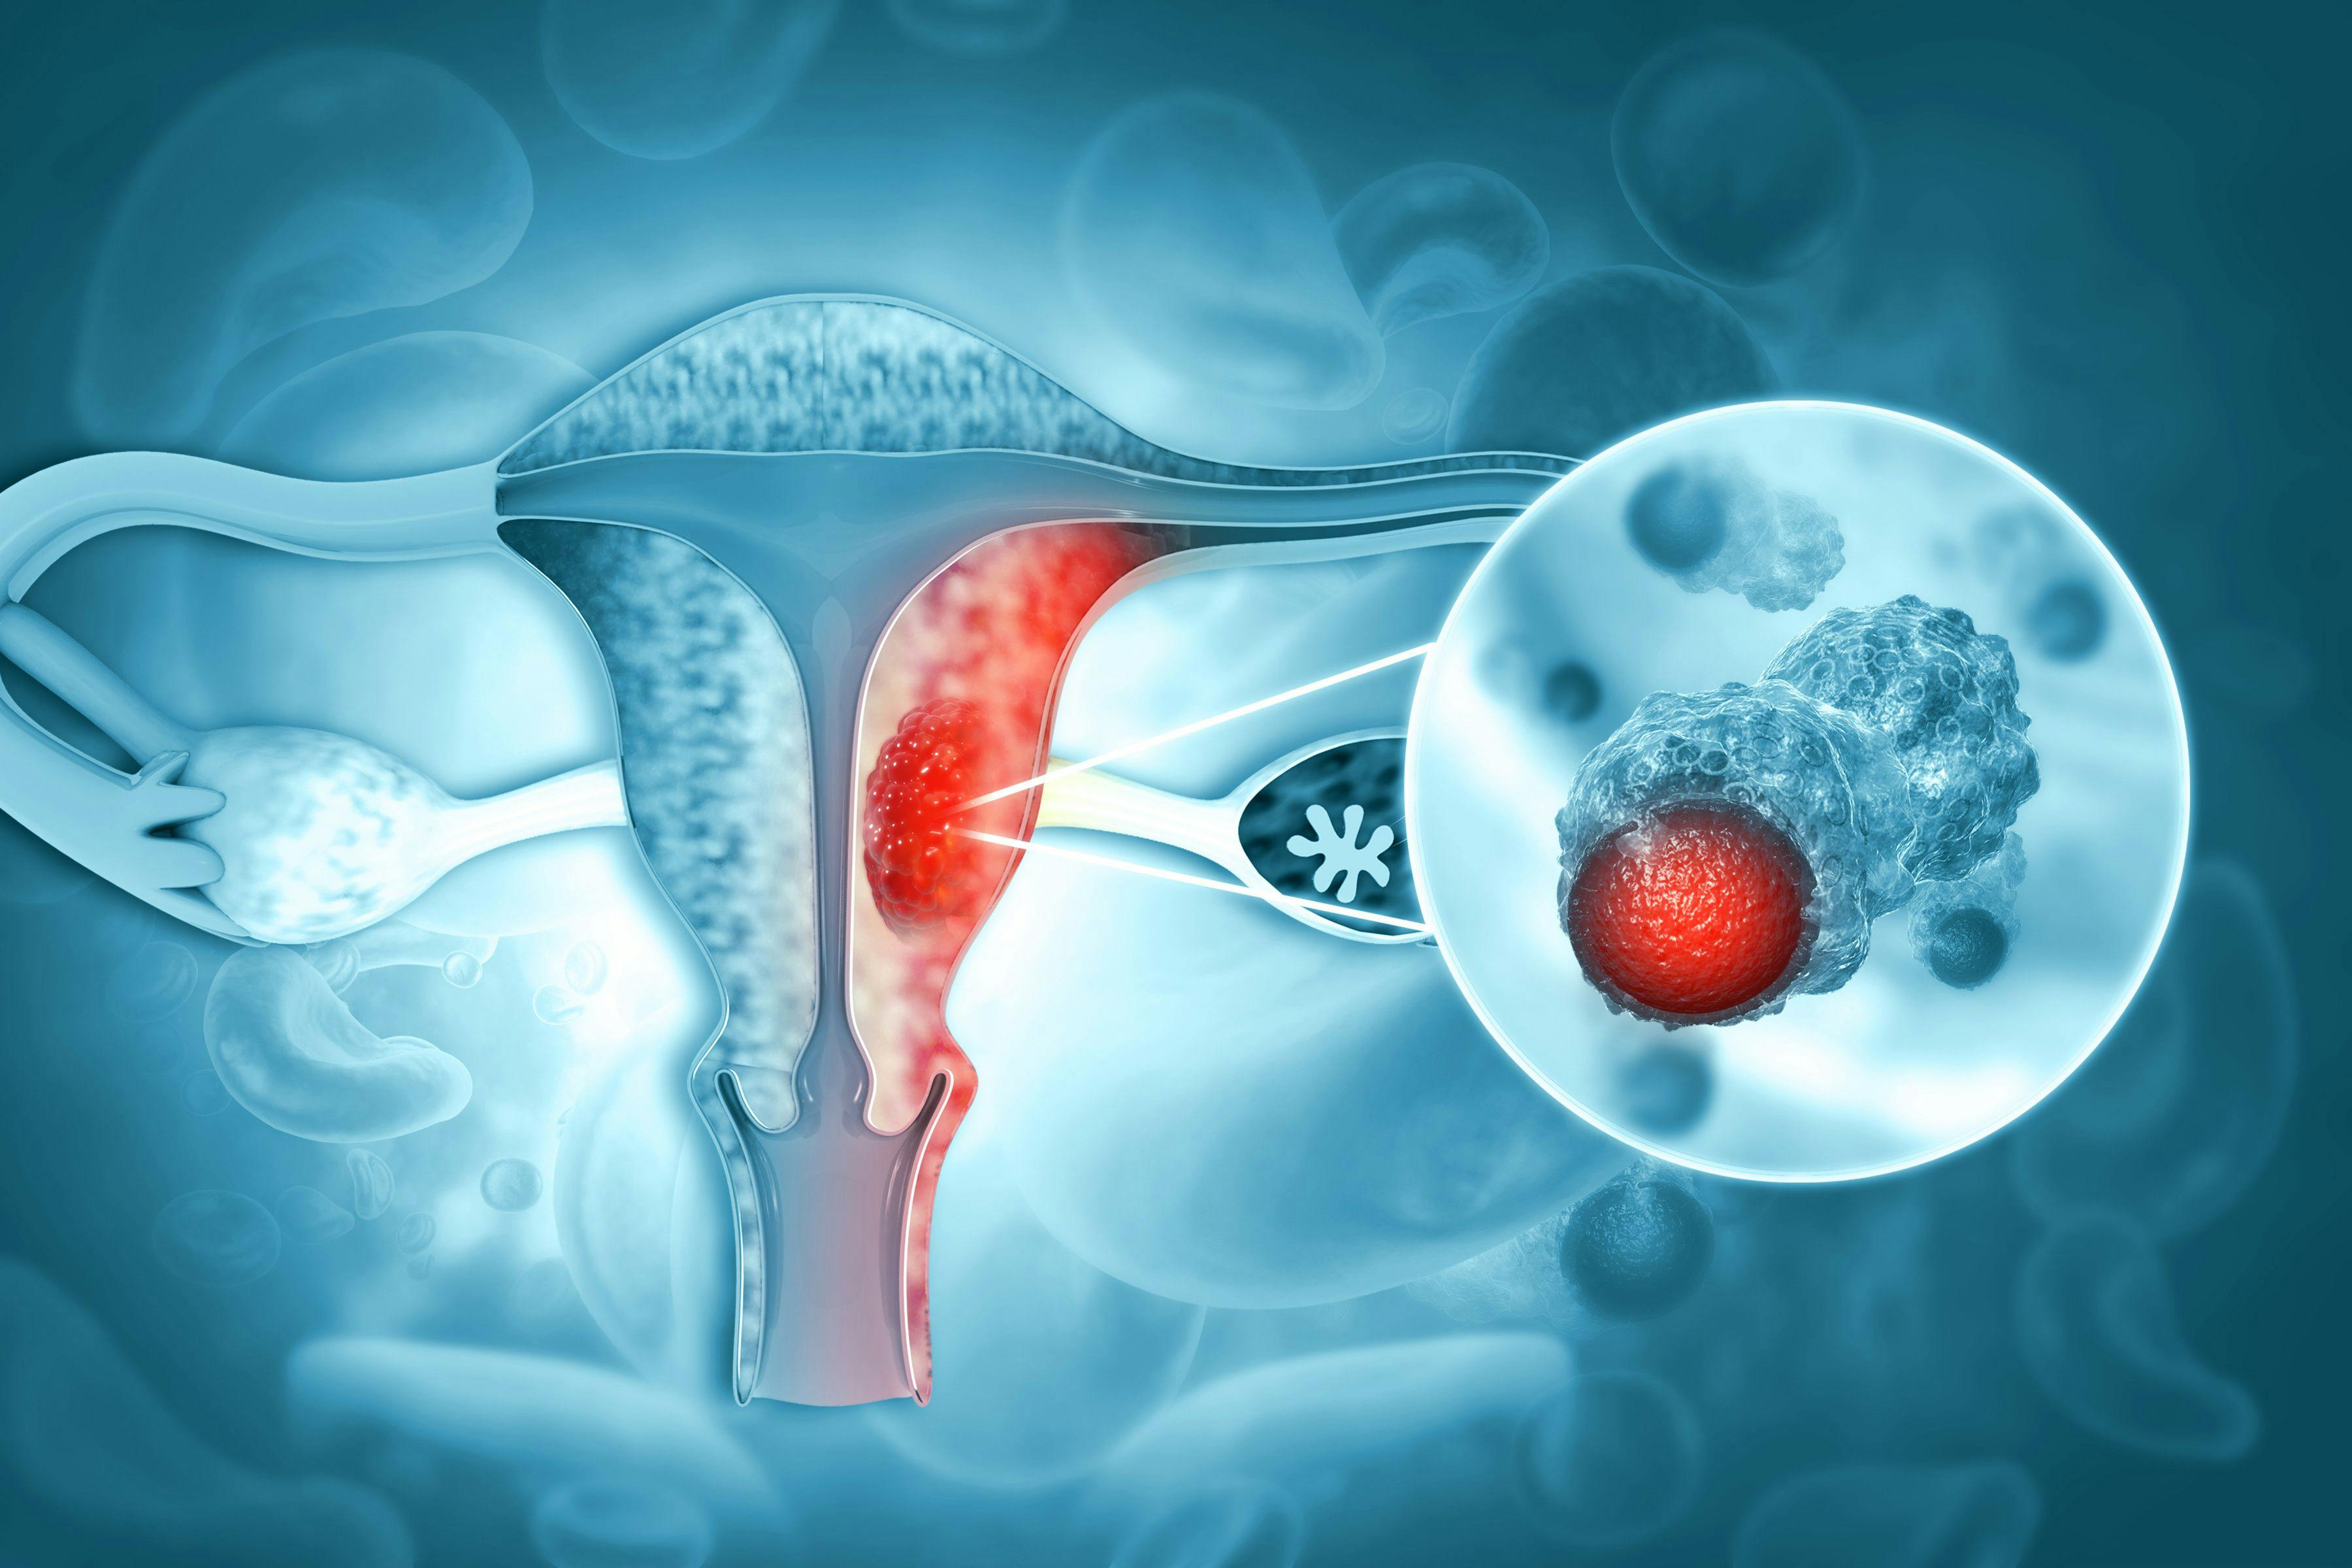 An image of a female reproductive system with a tumor representing endometrial cancer.